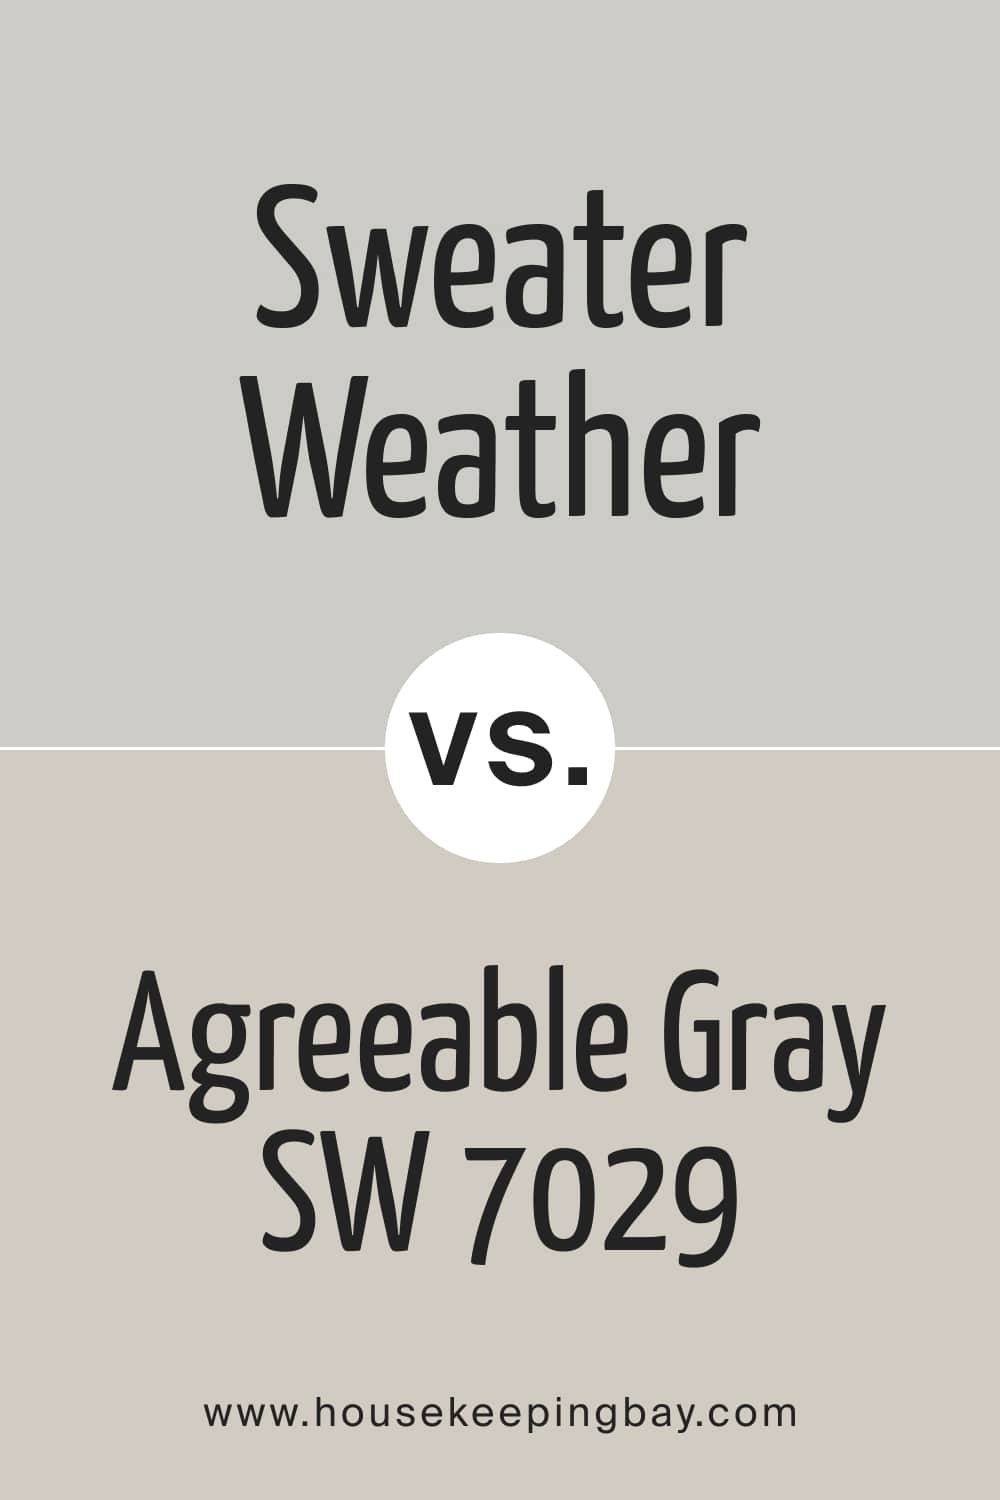 Sweater Weather SW 9548 vs Agreeable Gray SW 7029